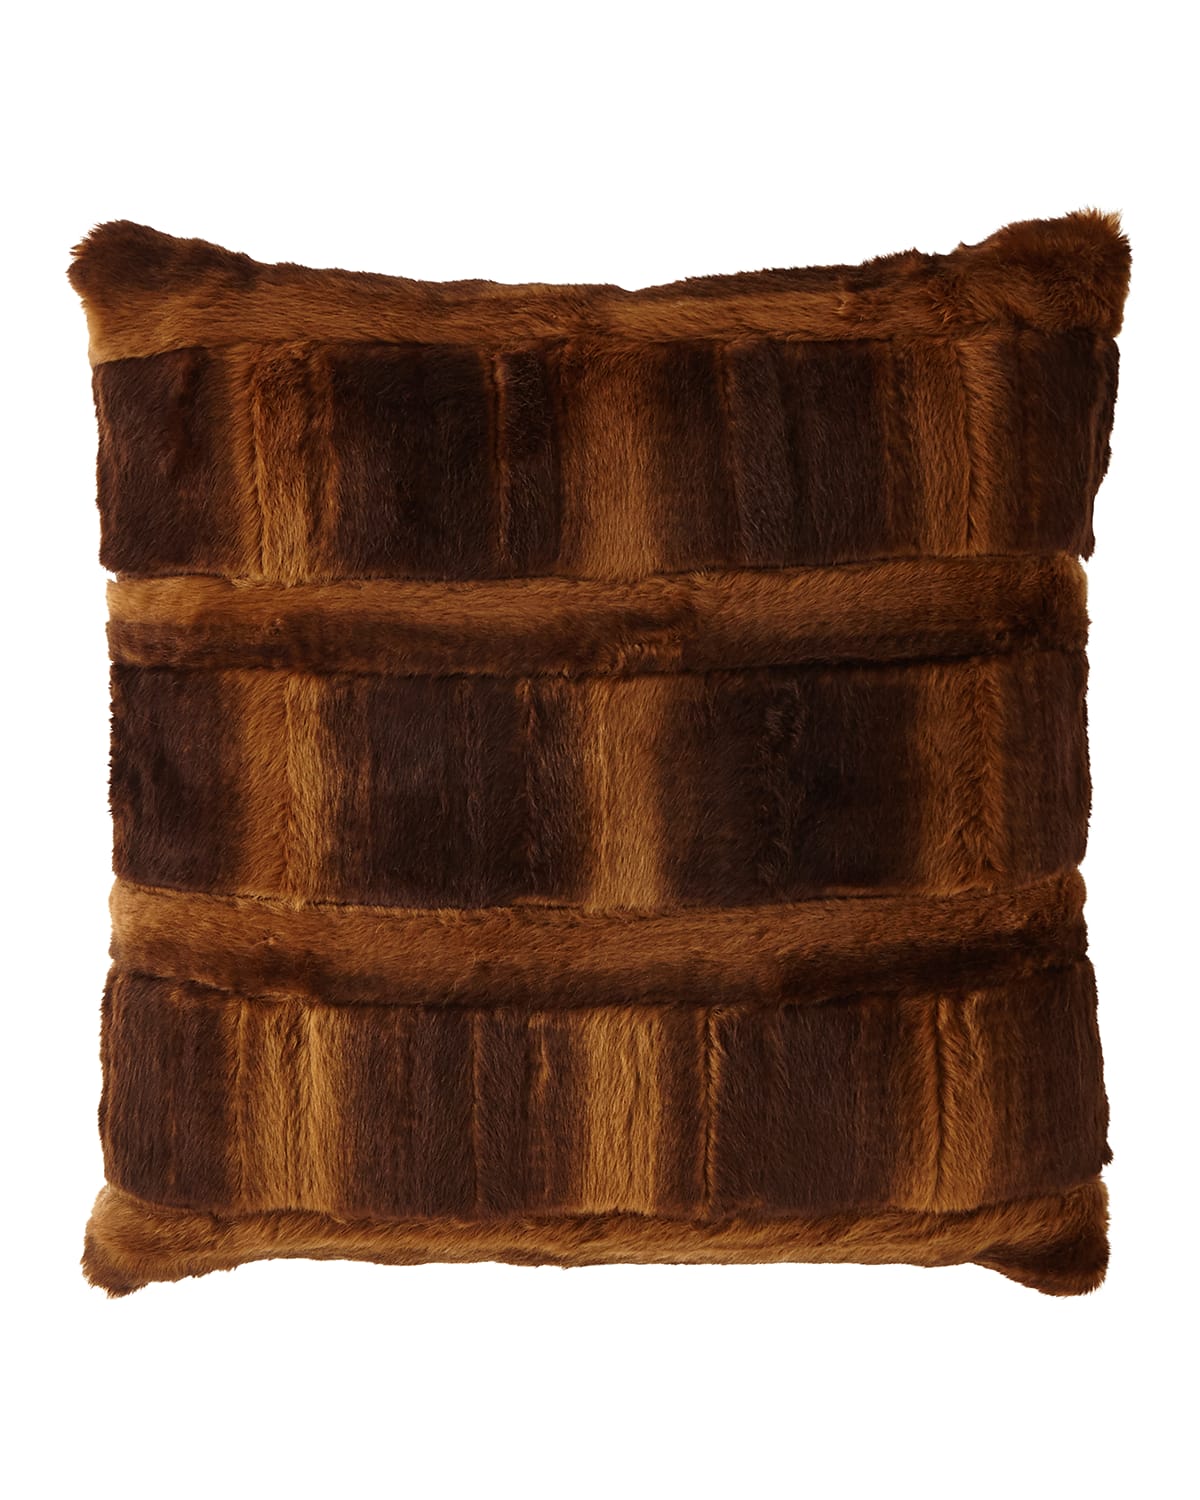 Image Sweet Dreams Spencer Pieced Faux-Fur Square Pillow